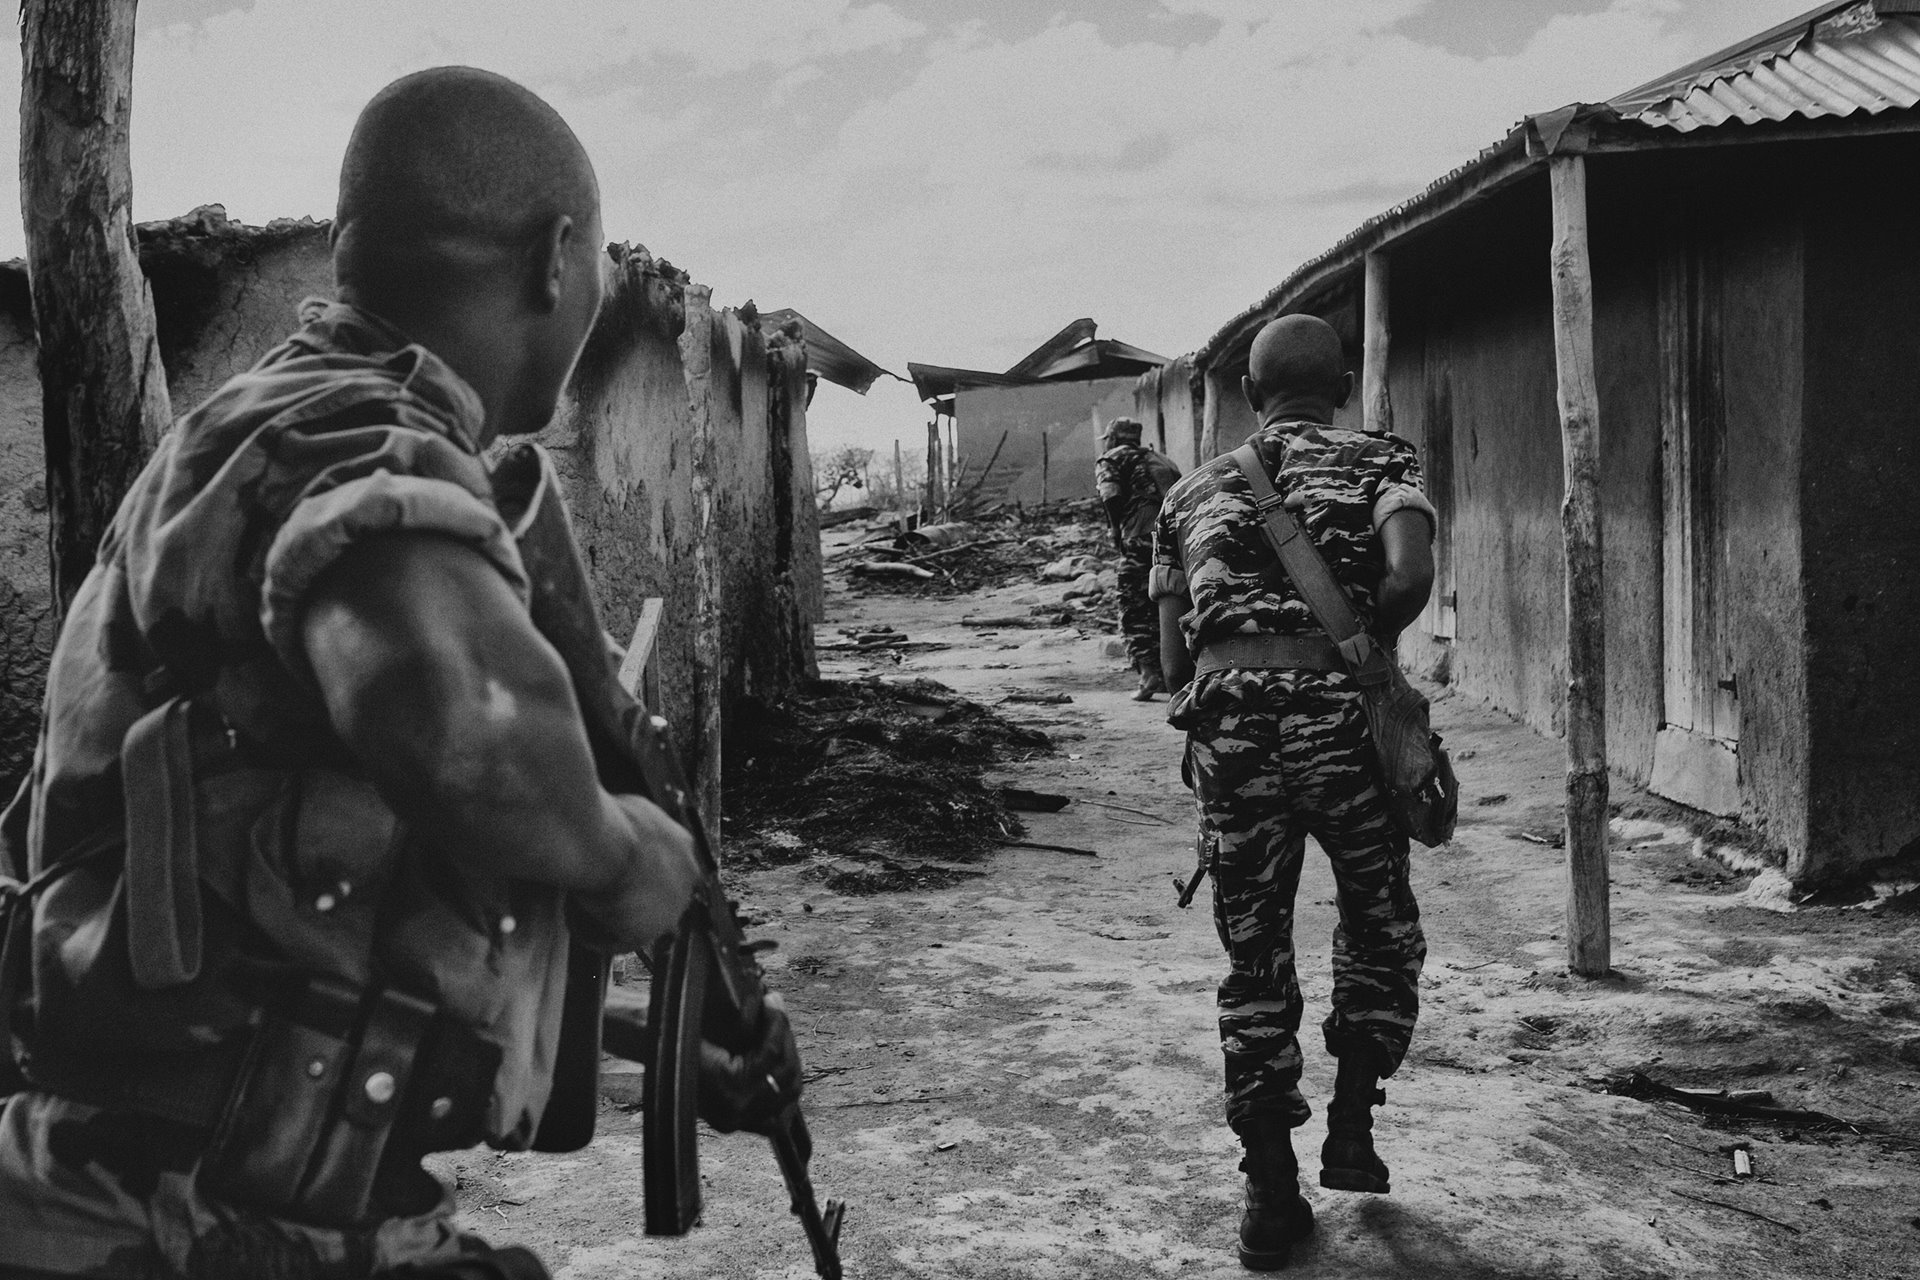 Security forces enter the village of Ambatotsivala , Madagascar, in an operation against cattle thieves. Ambatotsivala and a neighboring village, Andranondambo, had been involved in numerous retaliatory attacks, after an initial raid by men from Ambatotsivala to steal zebu, on 7 May. Some 22 people were killed and 2,294 were left homeless in the attacks, according to reports in local media.